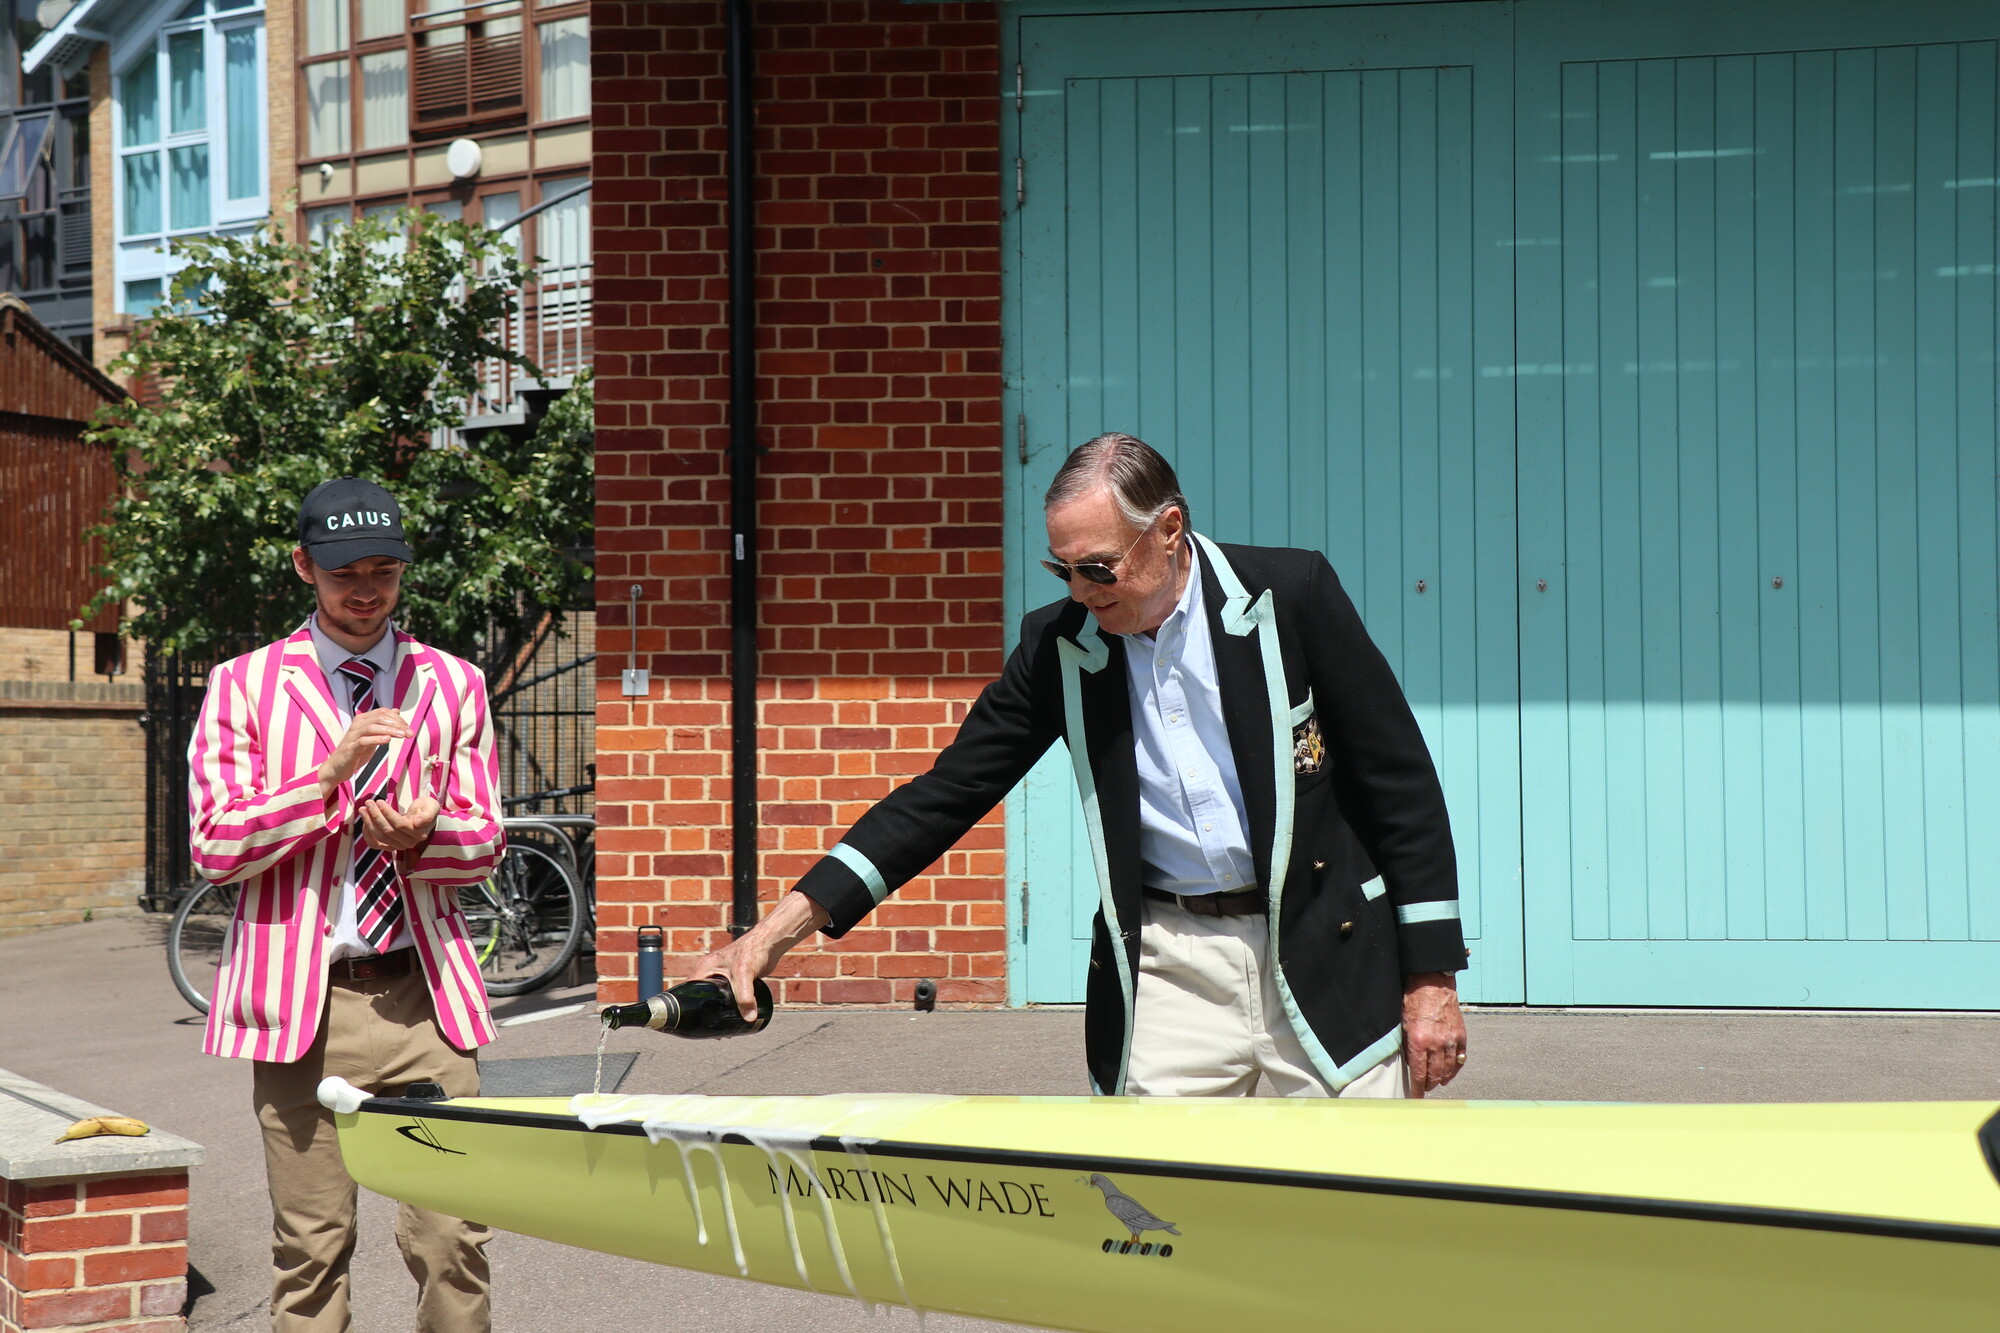 A man in a black blazer pours champagne over a rowing boat in a naming ceremony